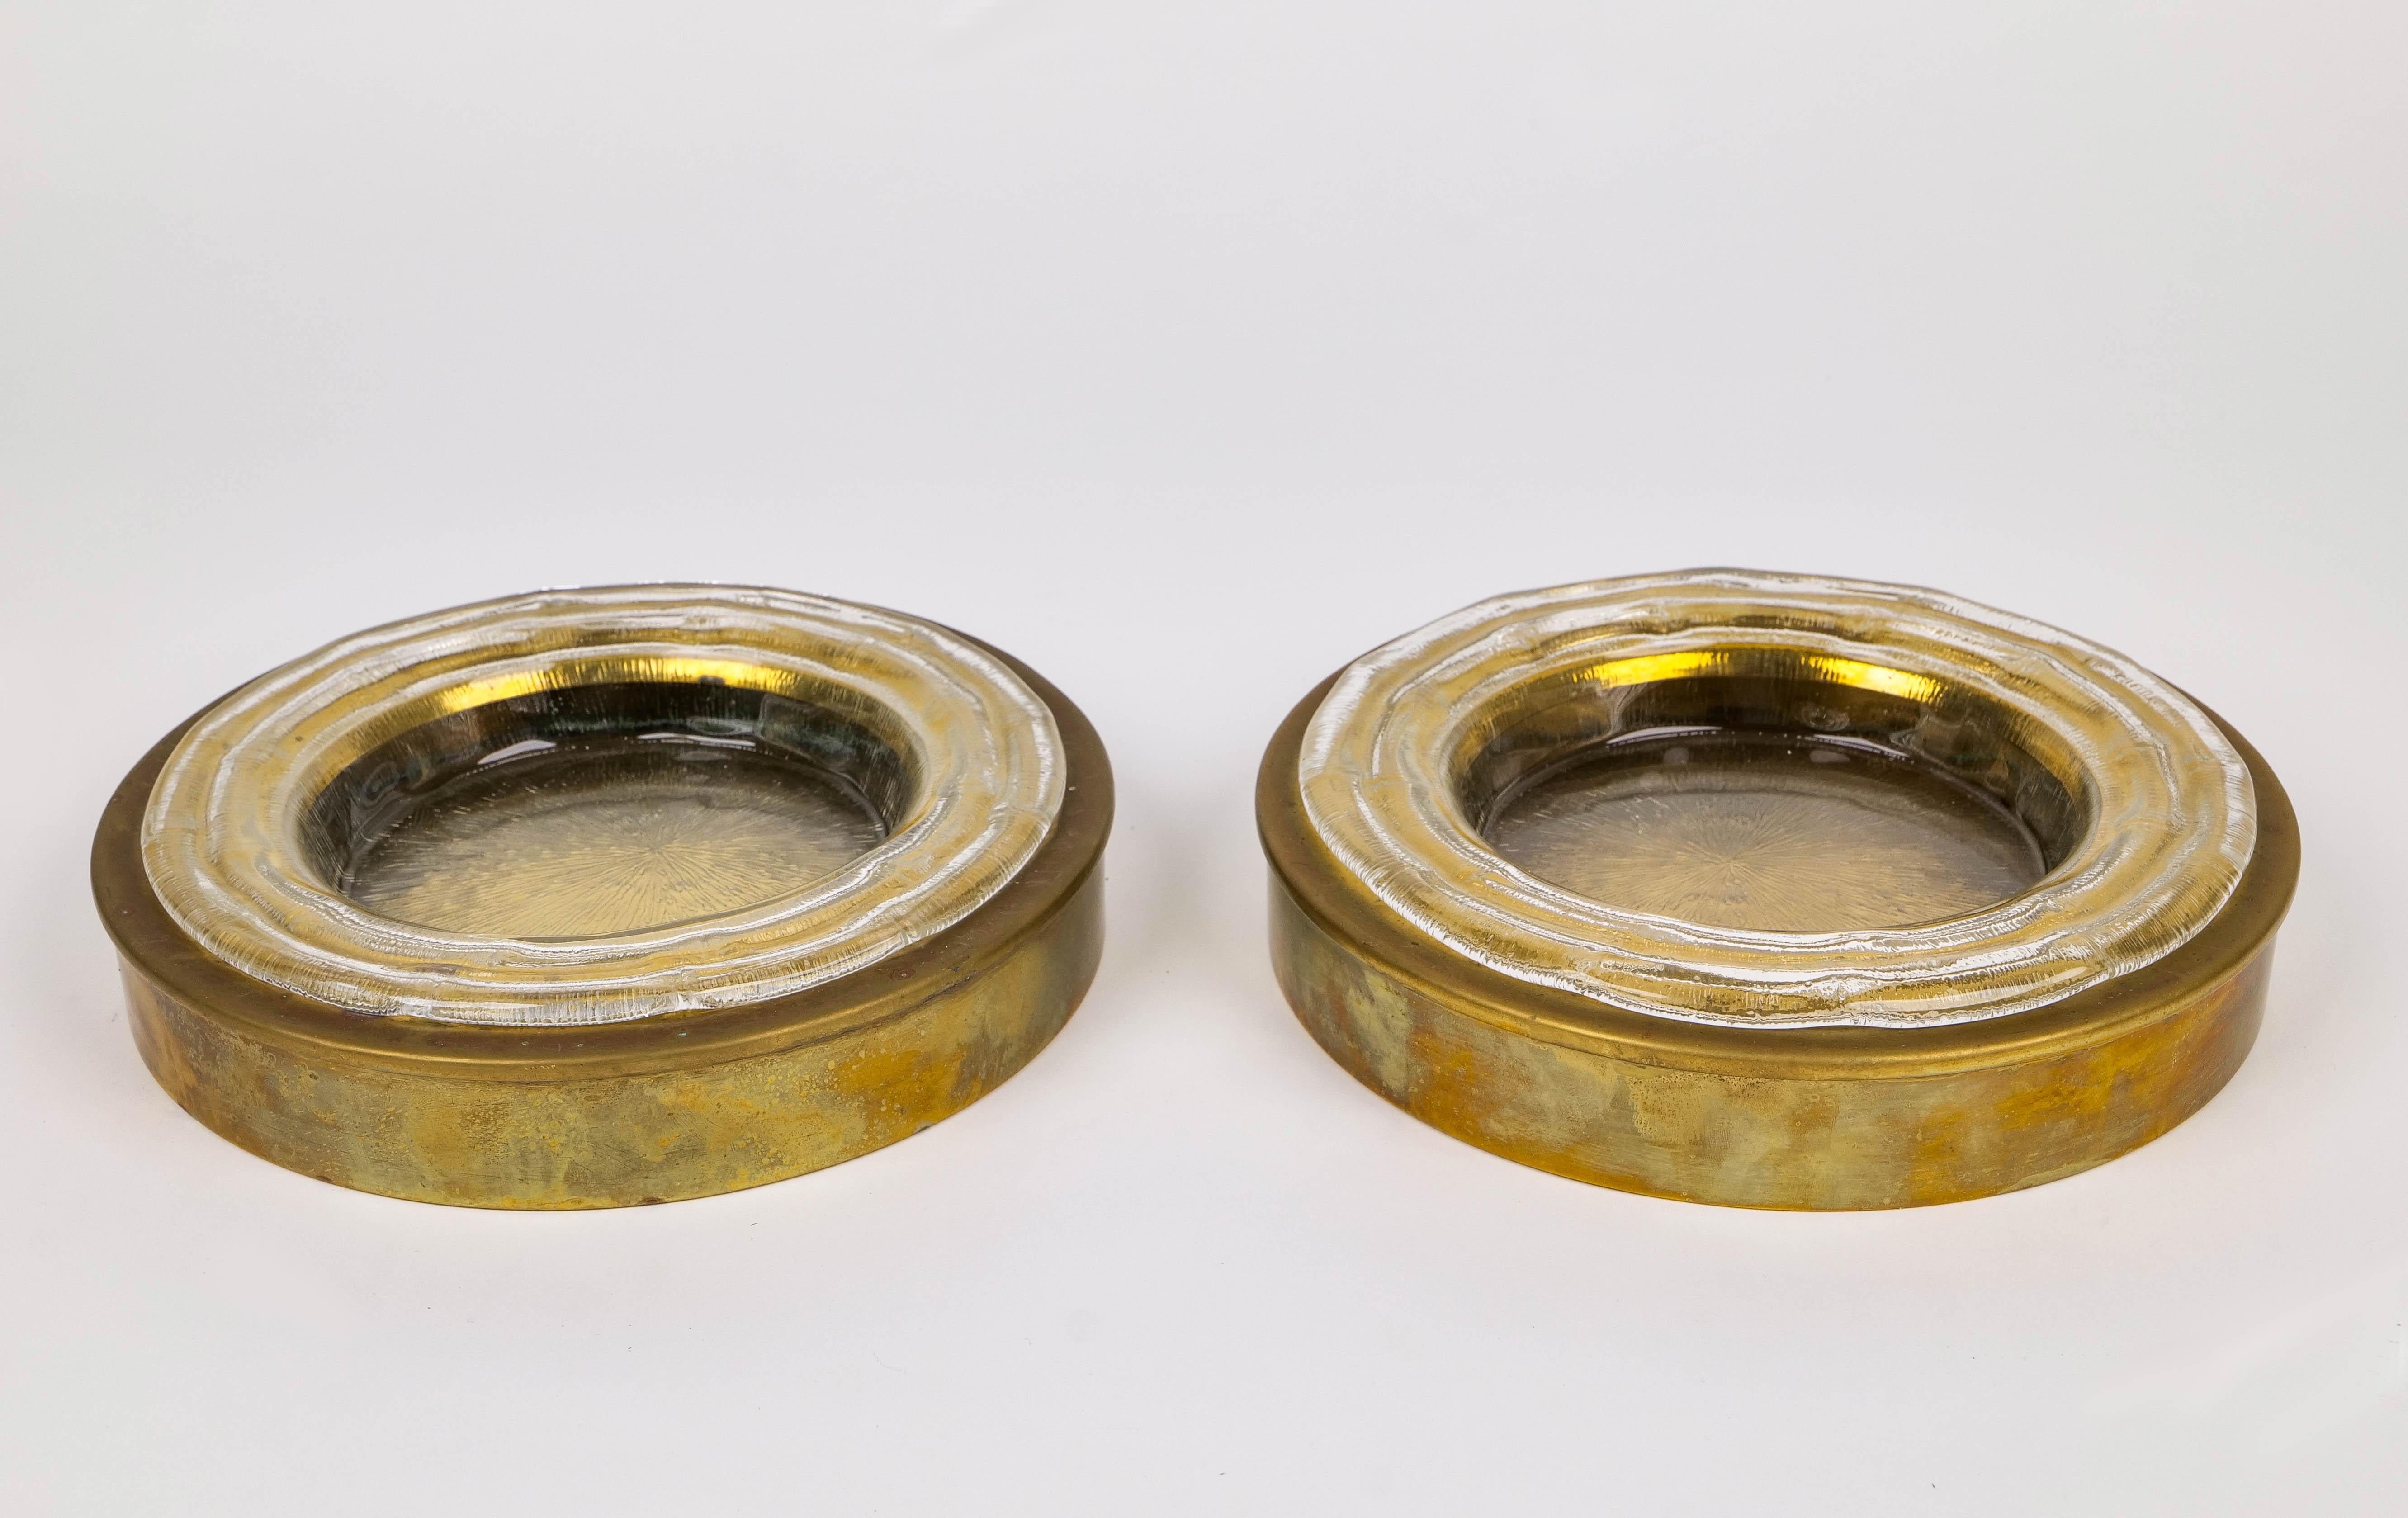 Pair of round vide pocket emptier bowls in brass and Murano glass. 

Made in Italy in the 1970s.